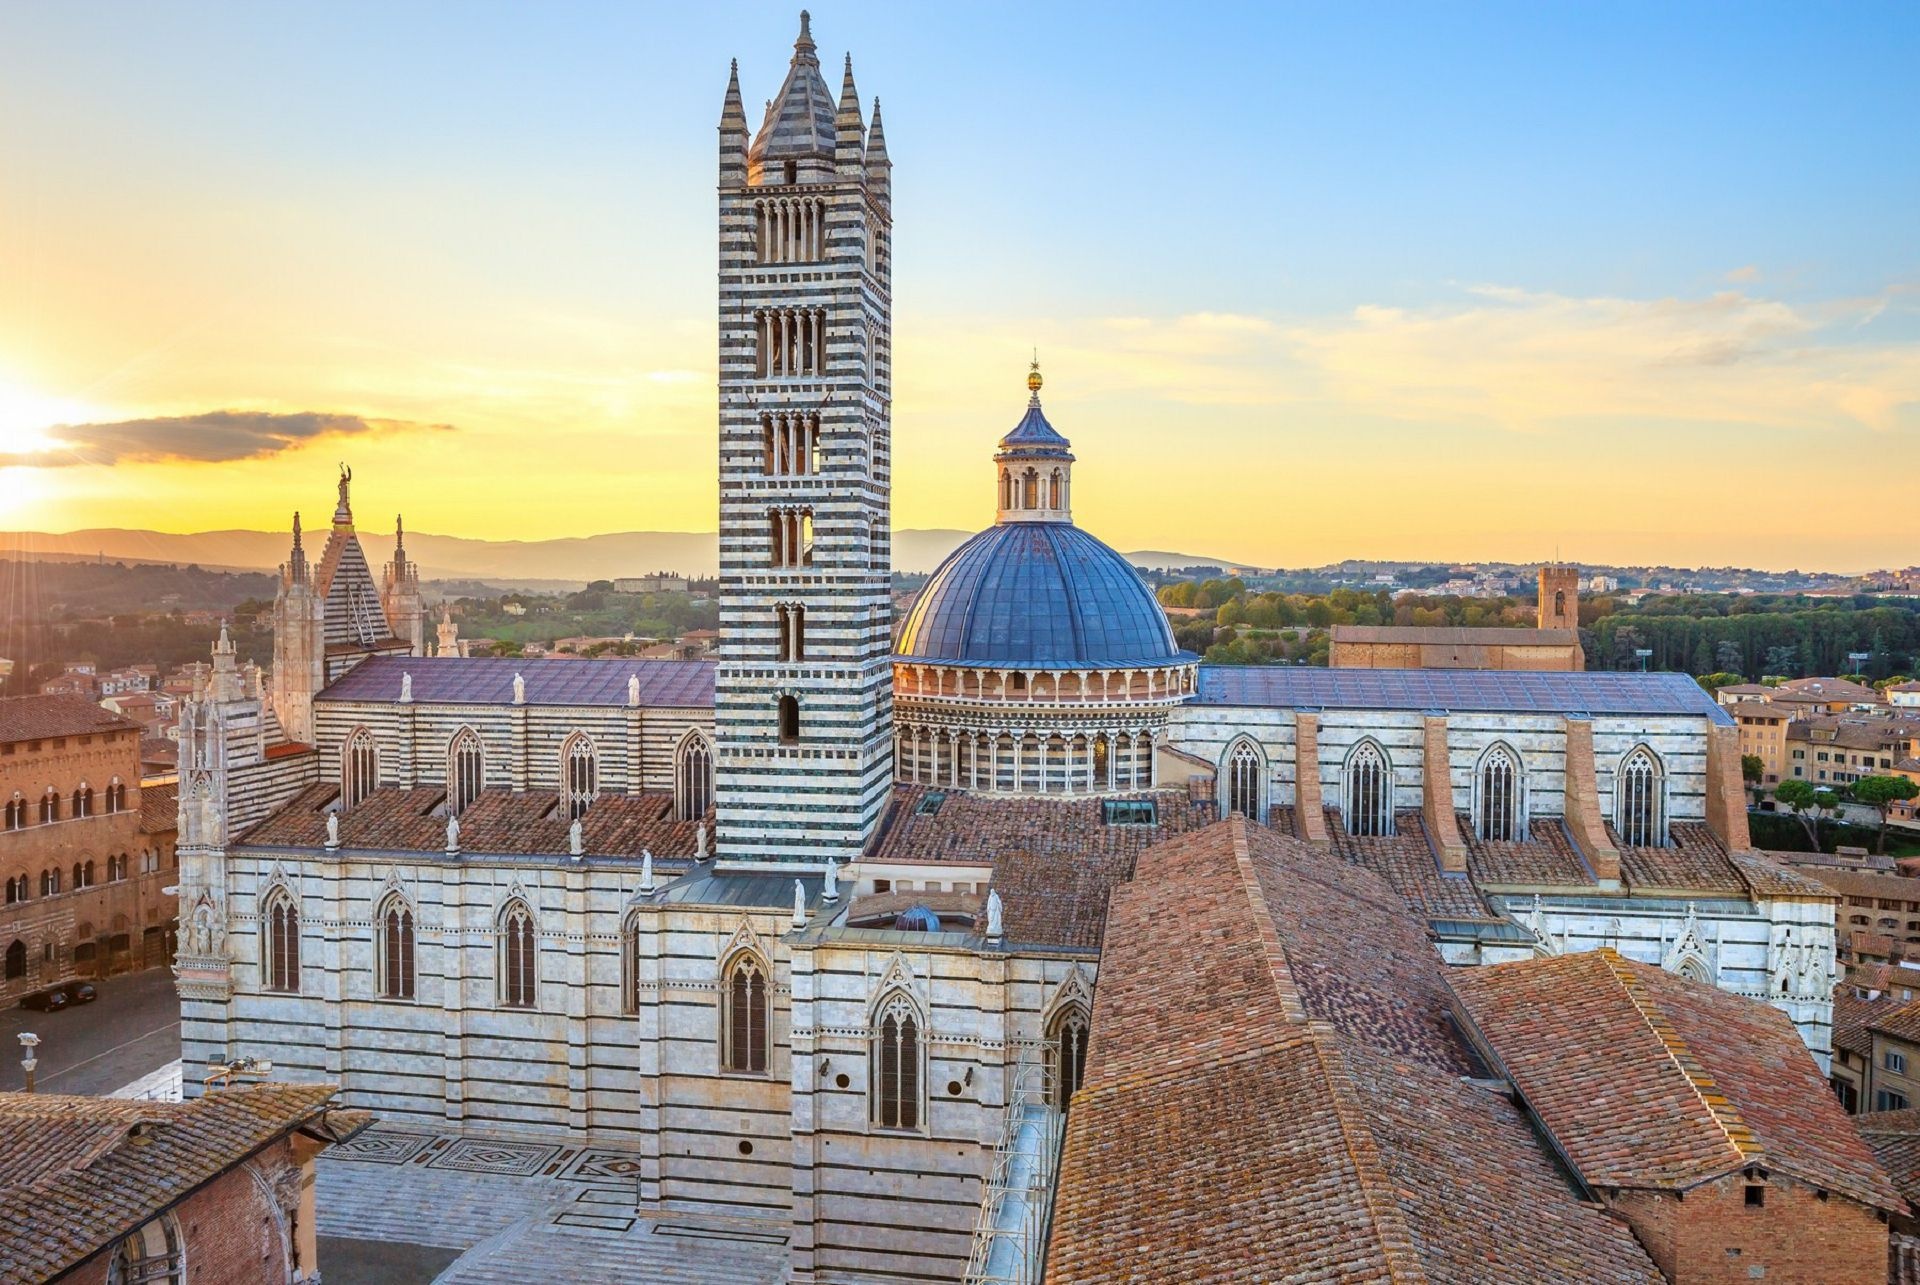 Siena Cathedral, High-definition wallpapers, Online wallpaper gallery, Exclusive collection, 1920x1290 HD Desktop